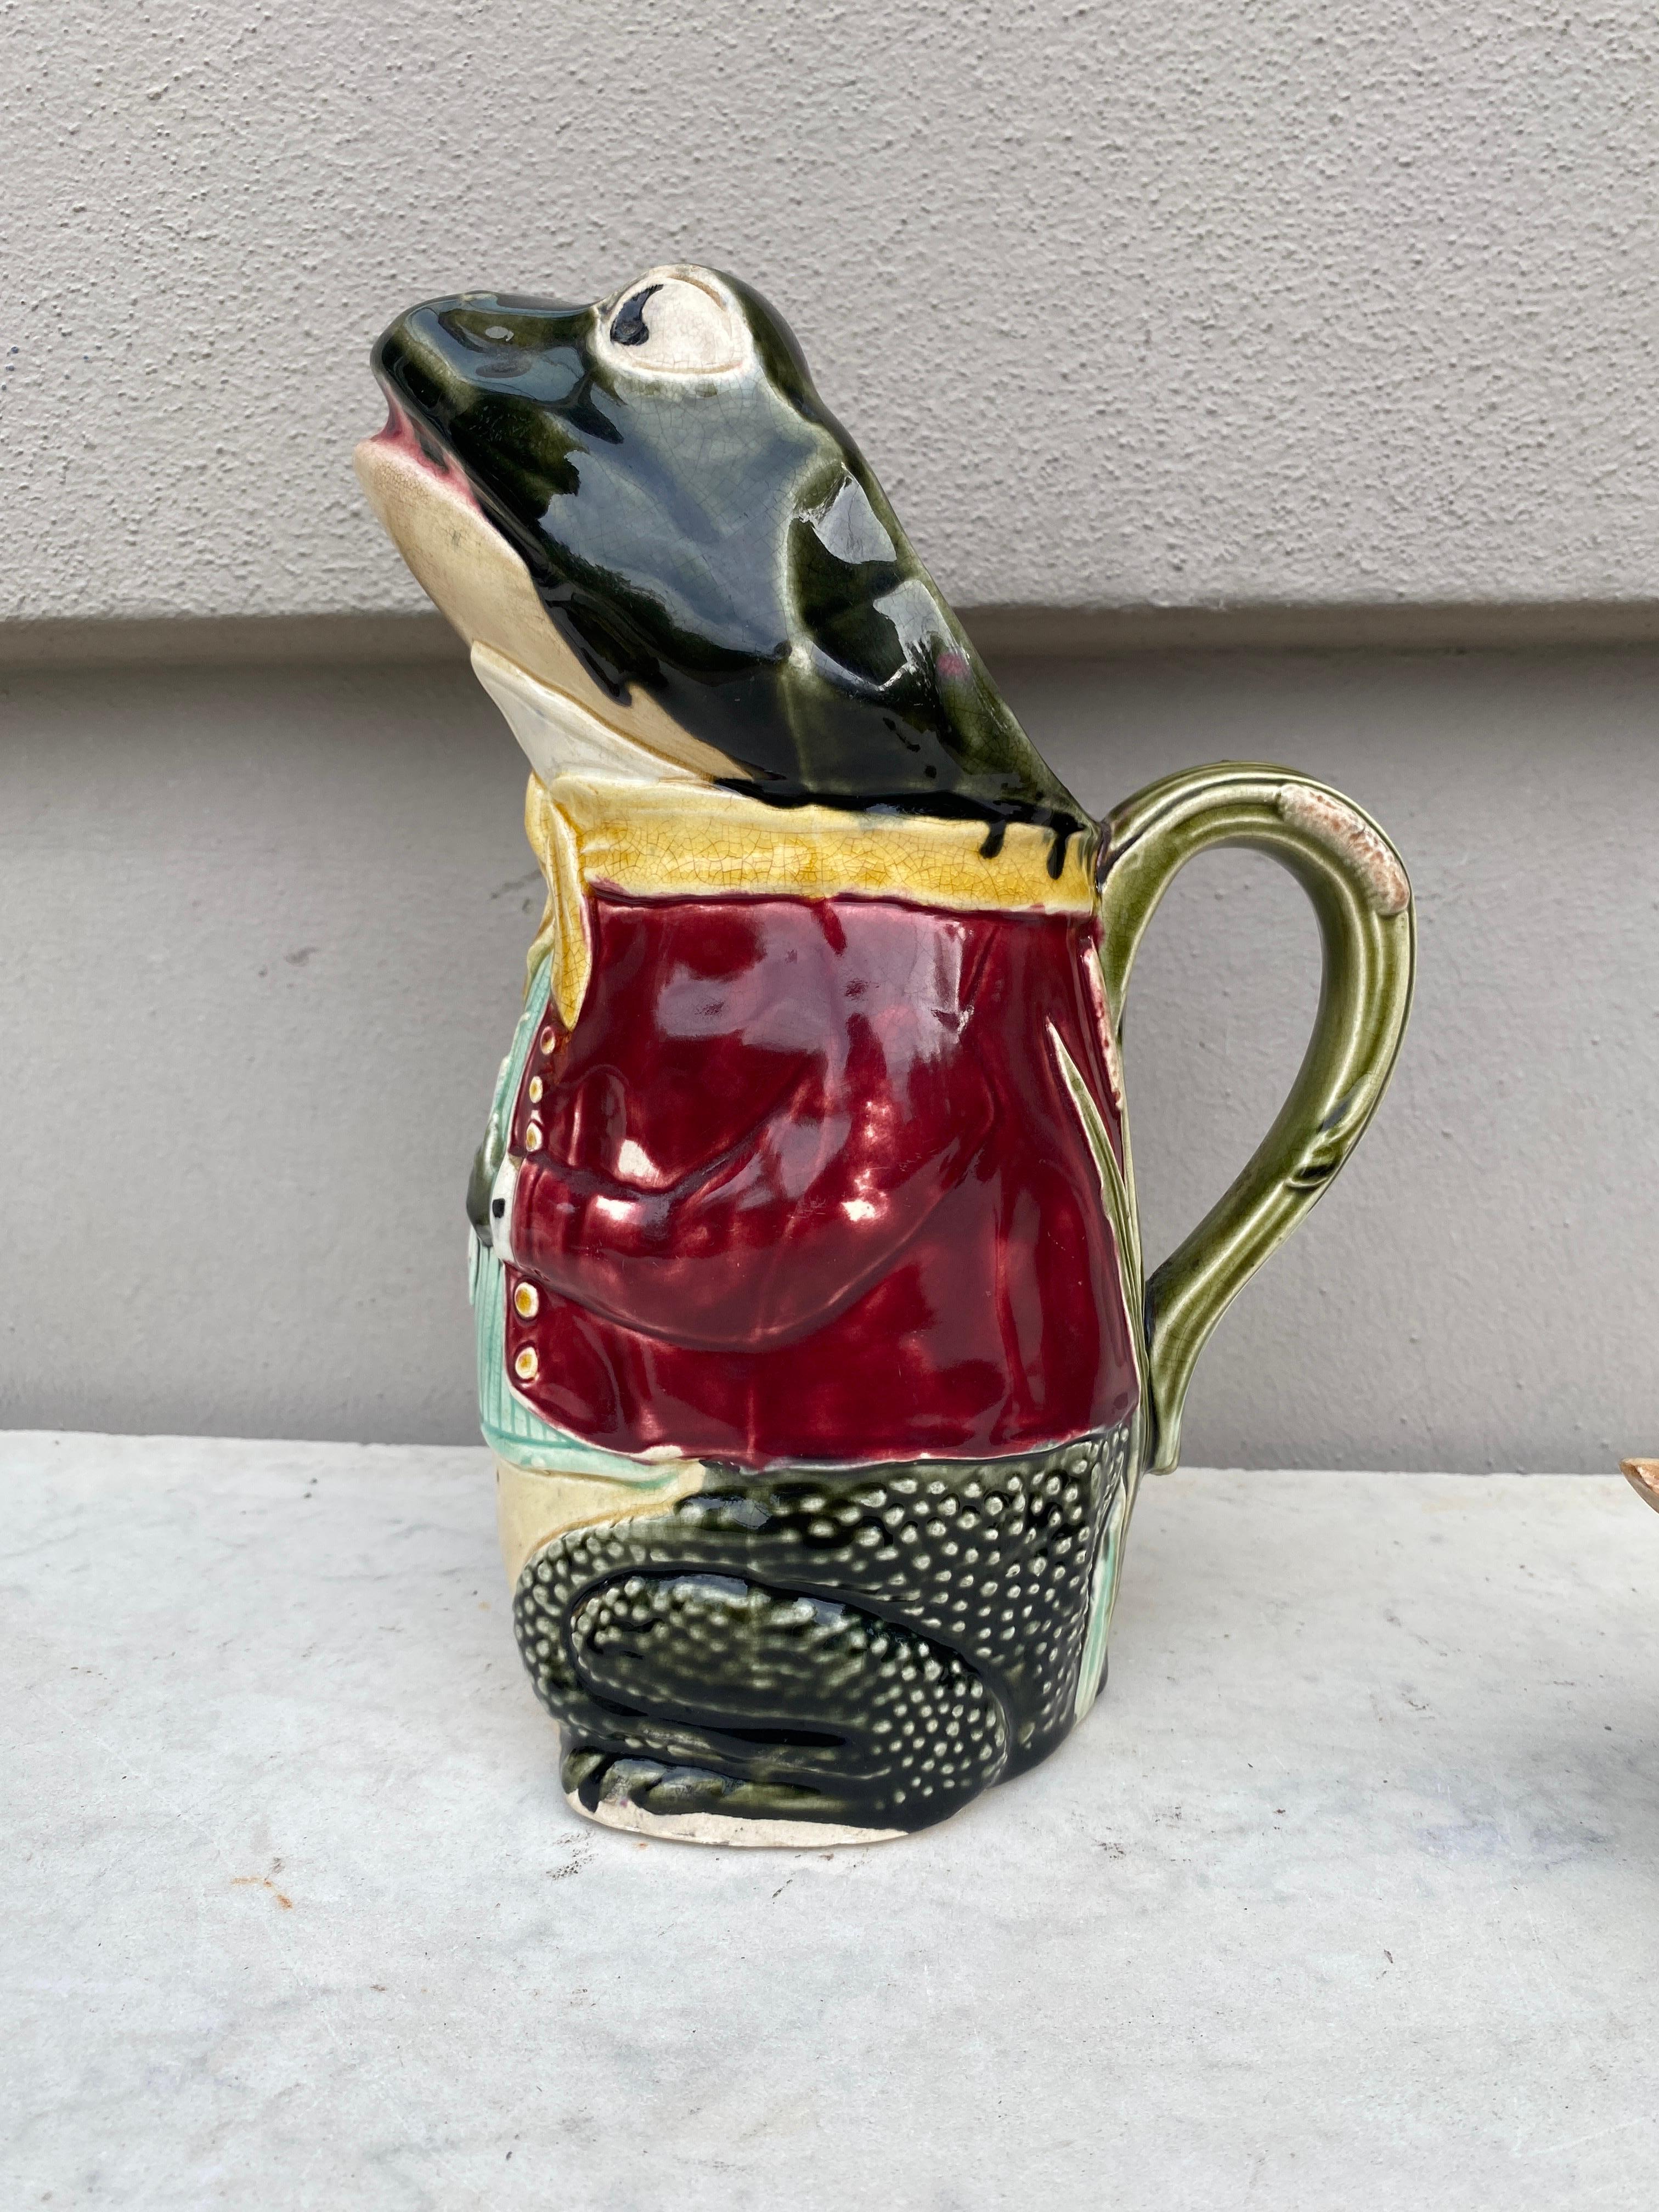 Unusual Majolica frog pitcher wearing a red jacket signed Fives Lille, circa 1890.